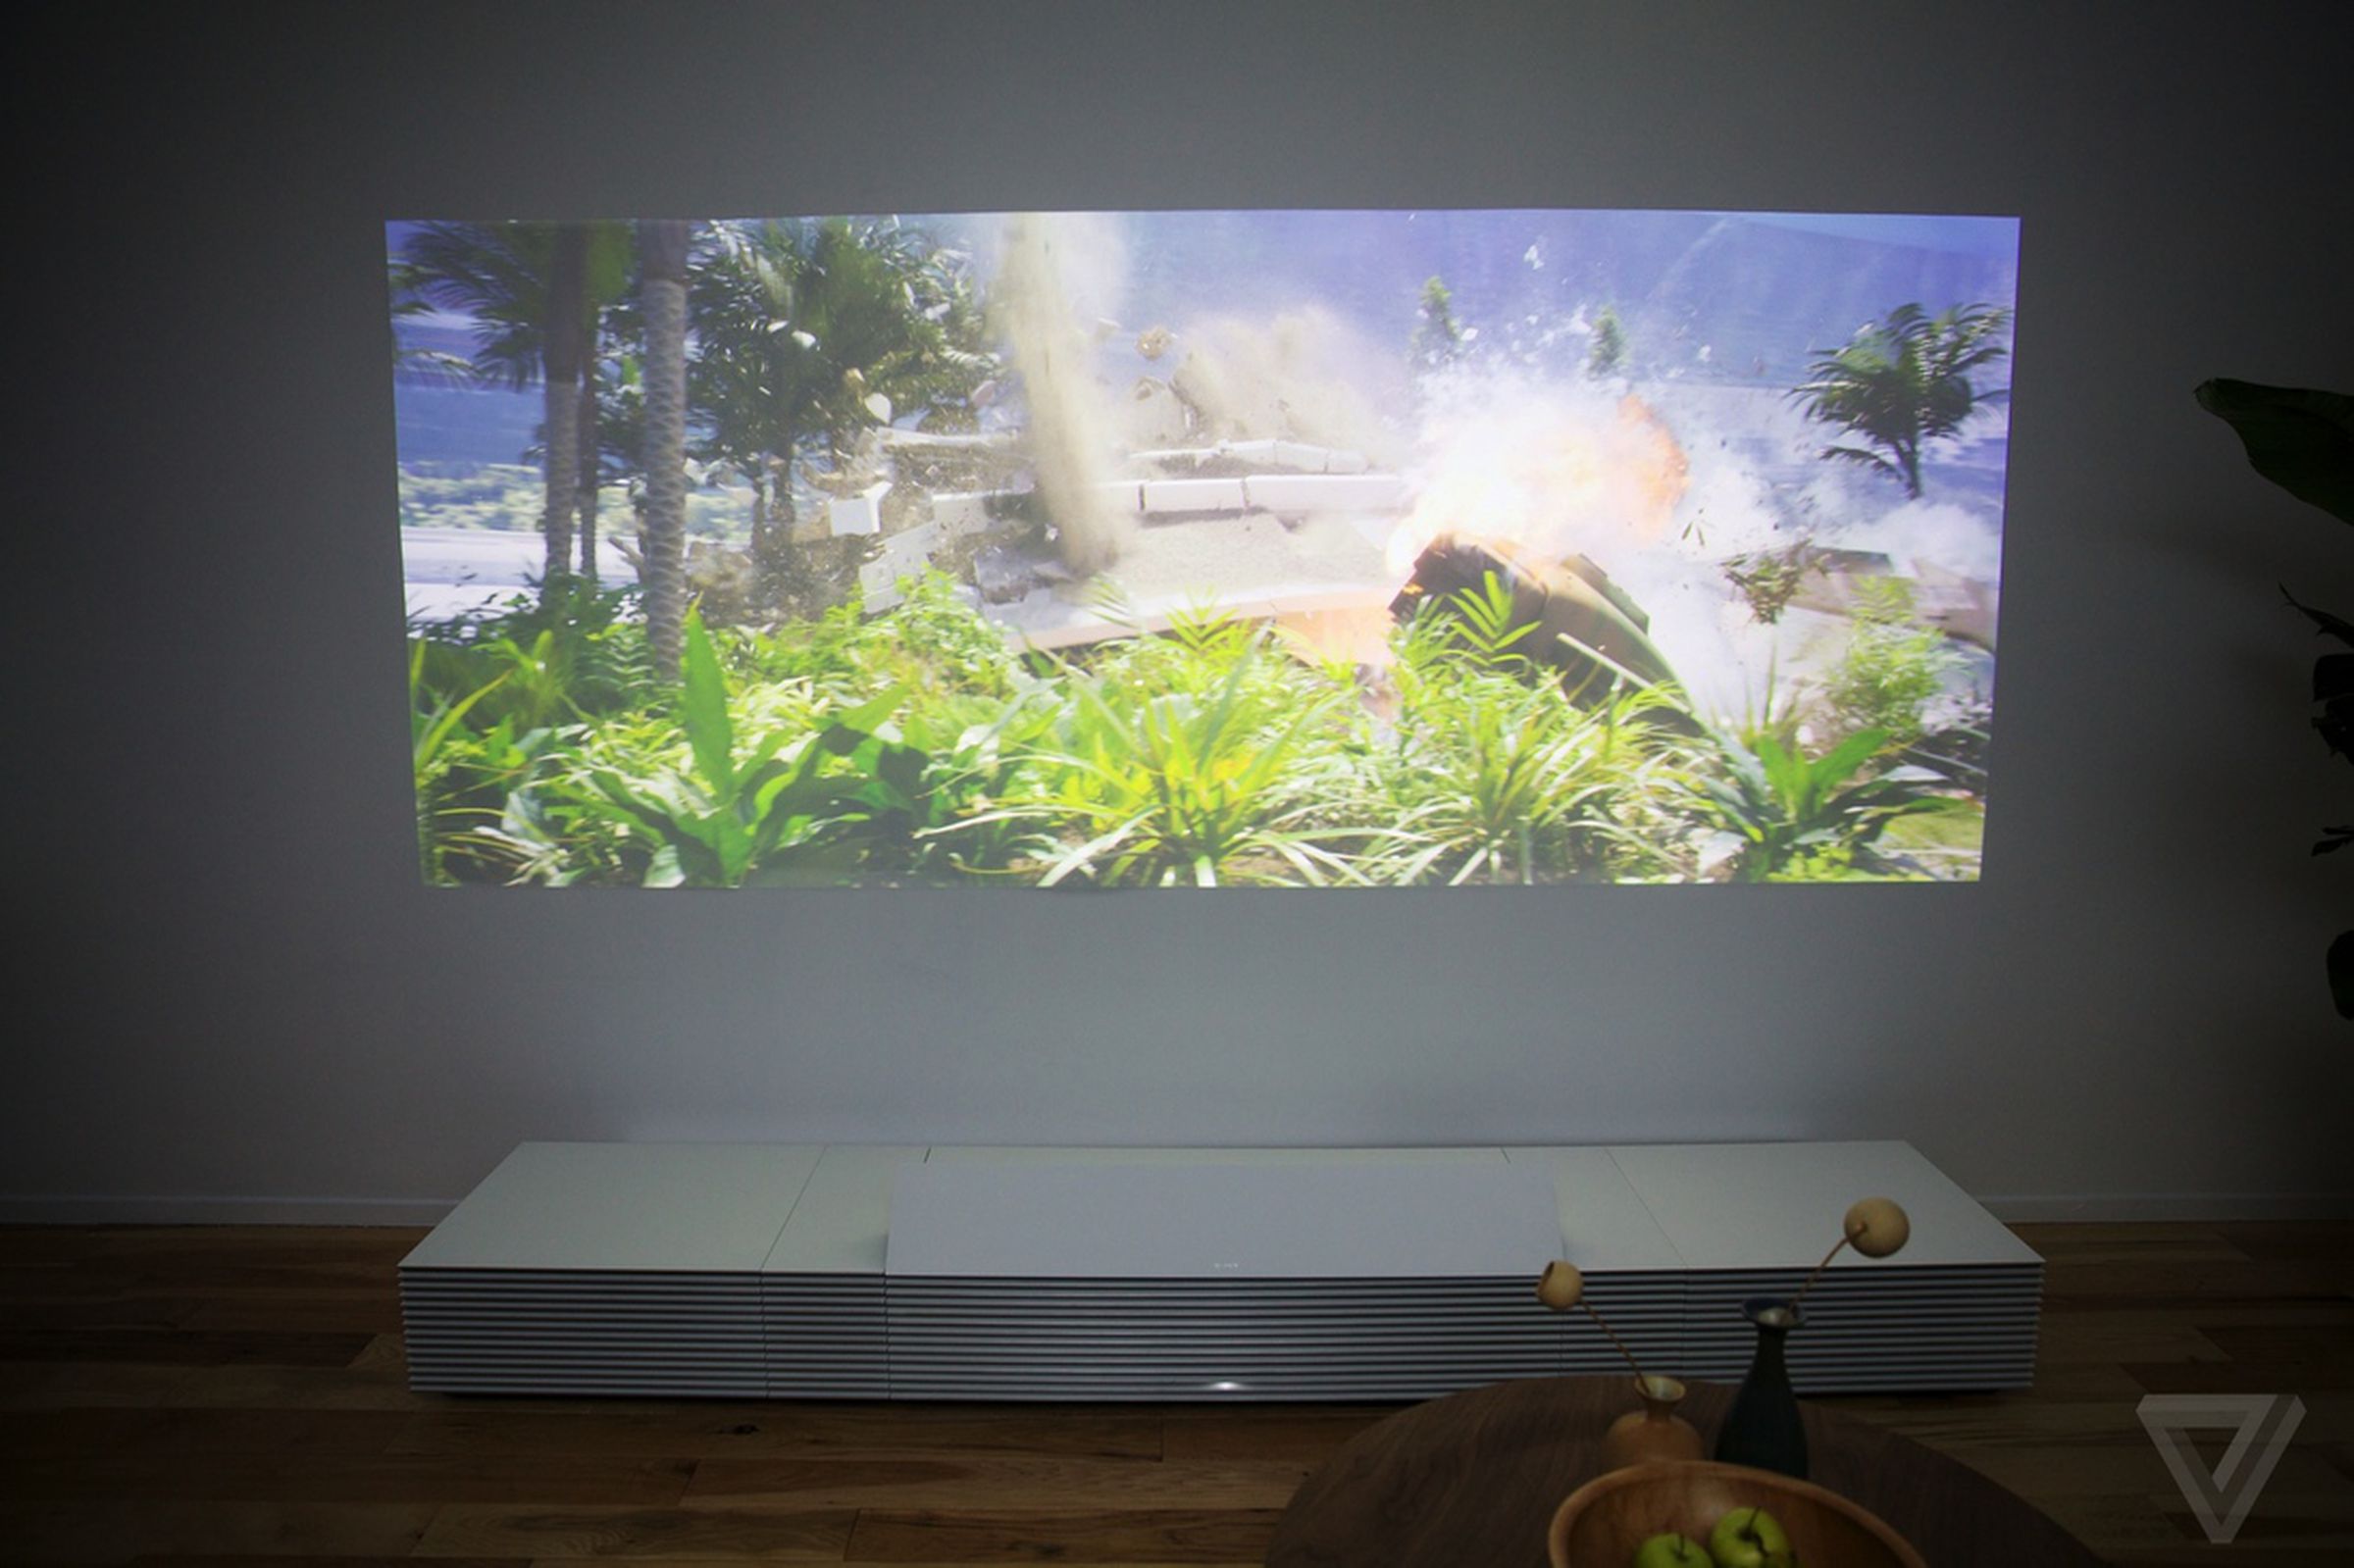 Demonstration of Sony's Life Space UX projector